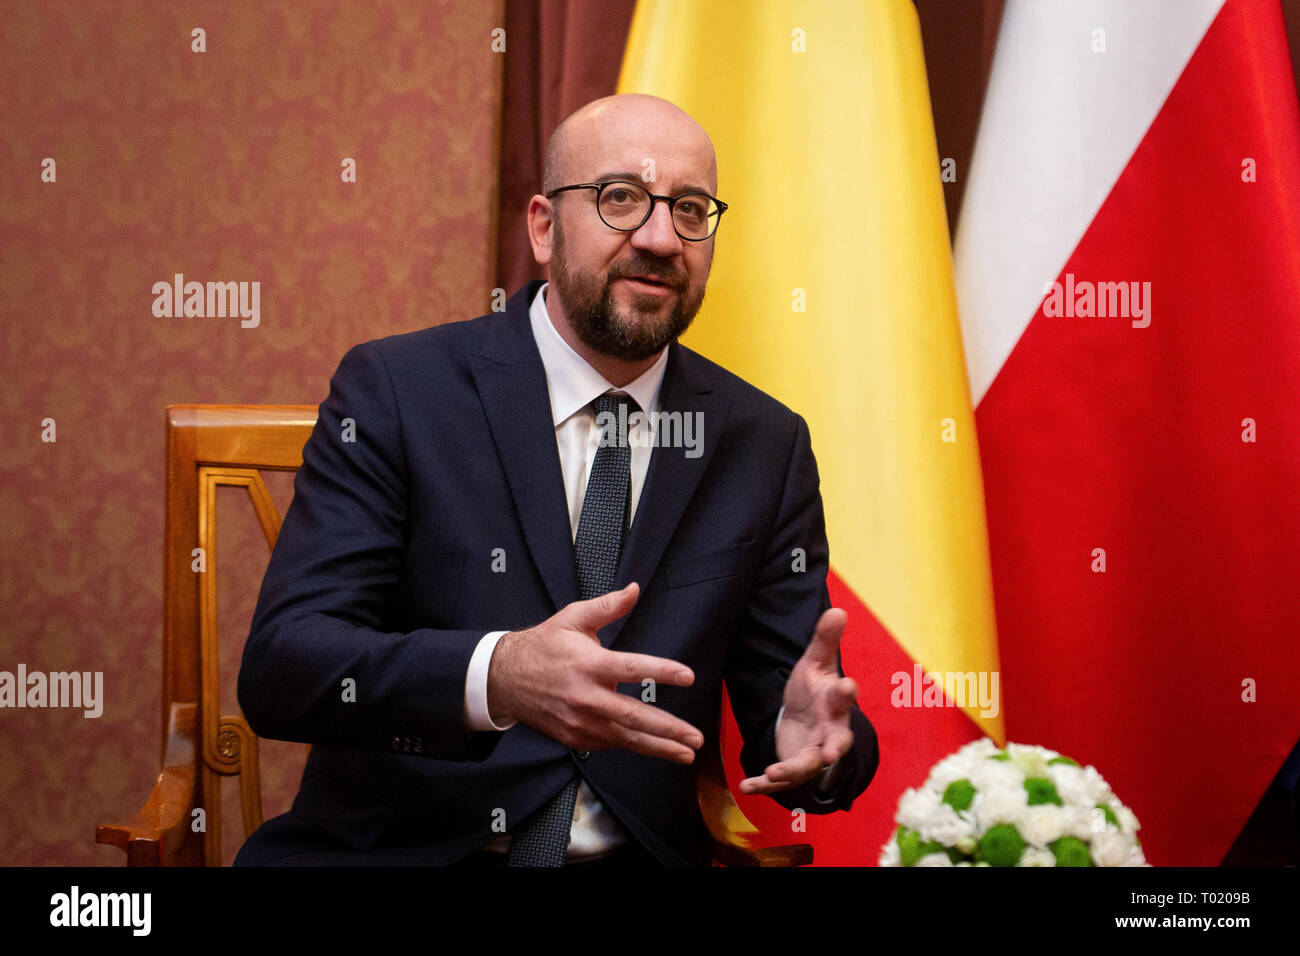 Prime Minister of Belgium Charles Michel during the meeting with Prime Minister of Poland Mateusz Morawiecki in Warsaw, Poland on 12 March 2019 Stock Photo